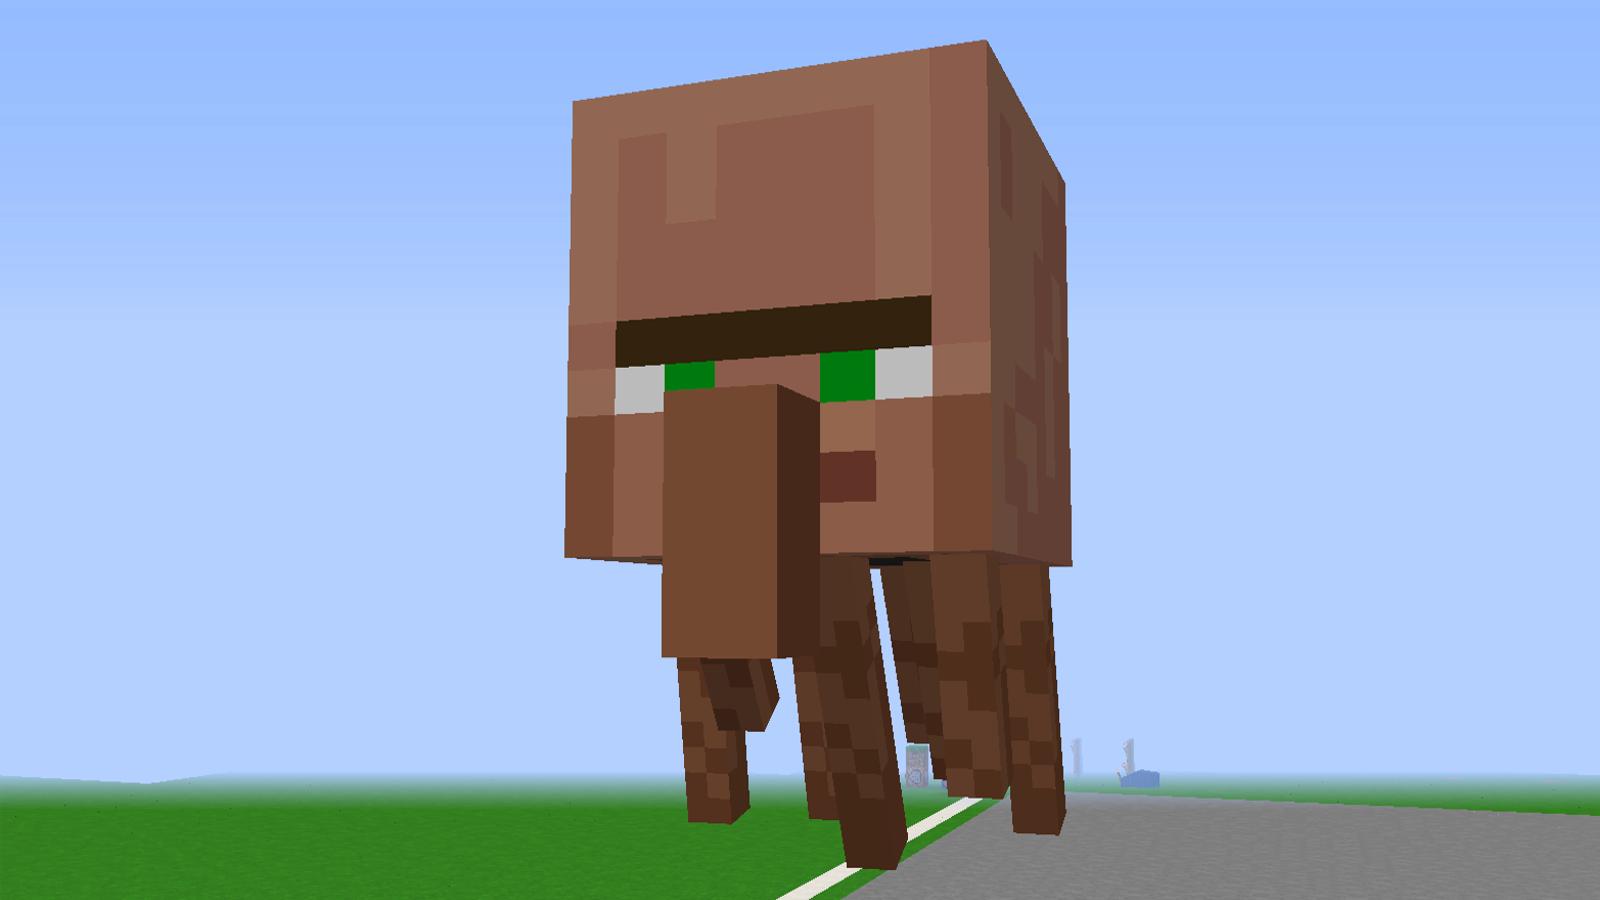 “Minecraft | Cursed Images 30 (Villager Ghasts) https://t.co/mrhOX4NImA” .